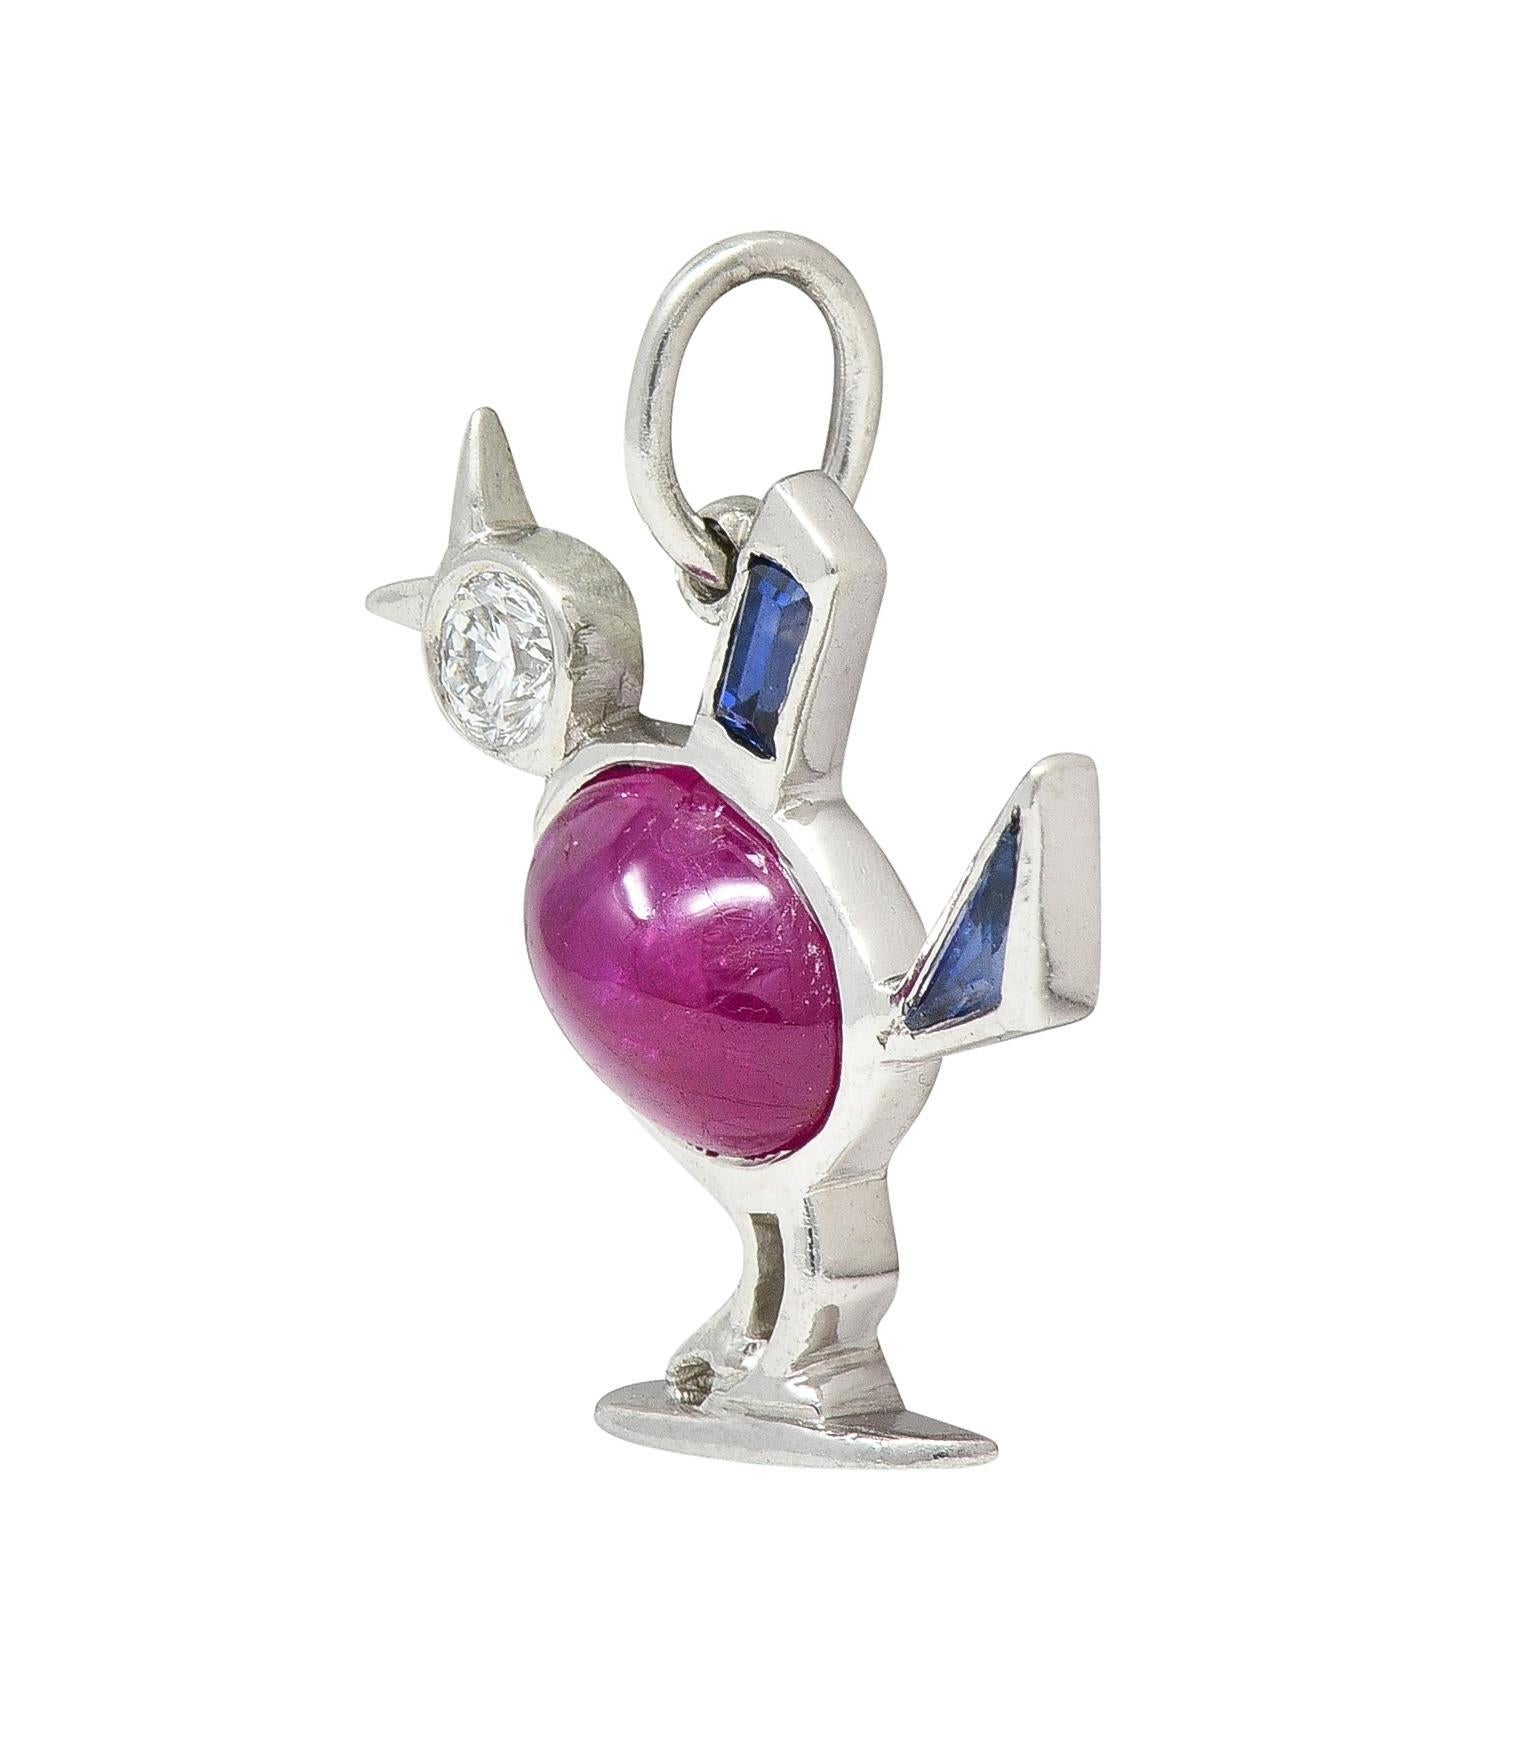 Designed as a stylized bird with a ruby cabochon body
Oval-shaped and weighing approximately 1.54 carats
Transparent medium red in color and bezel set
With a bezel set transitional cut diamond head
Weighing approximately 0.08 carat - eye clean and